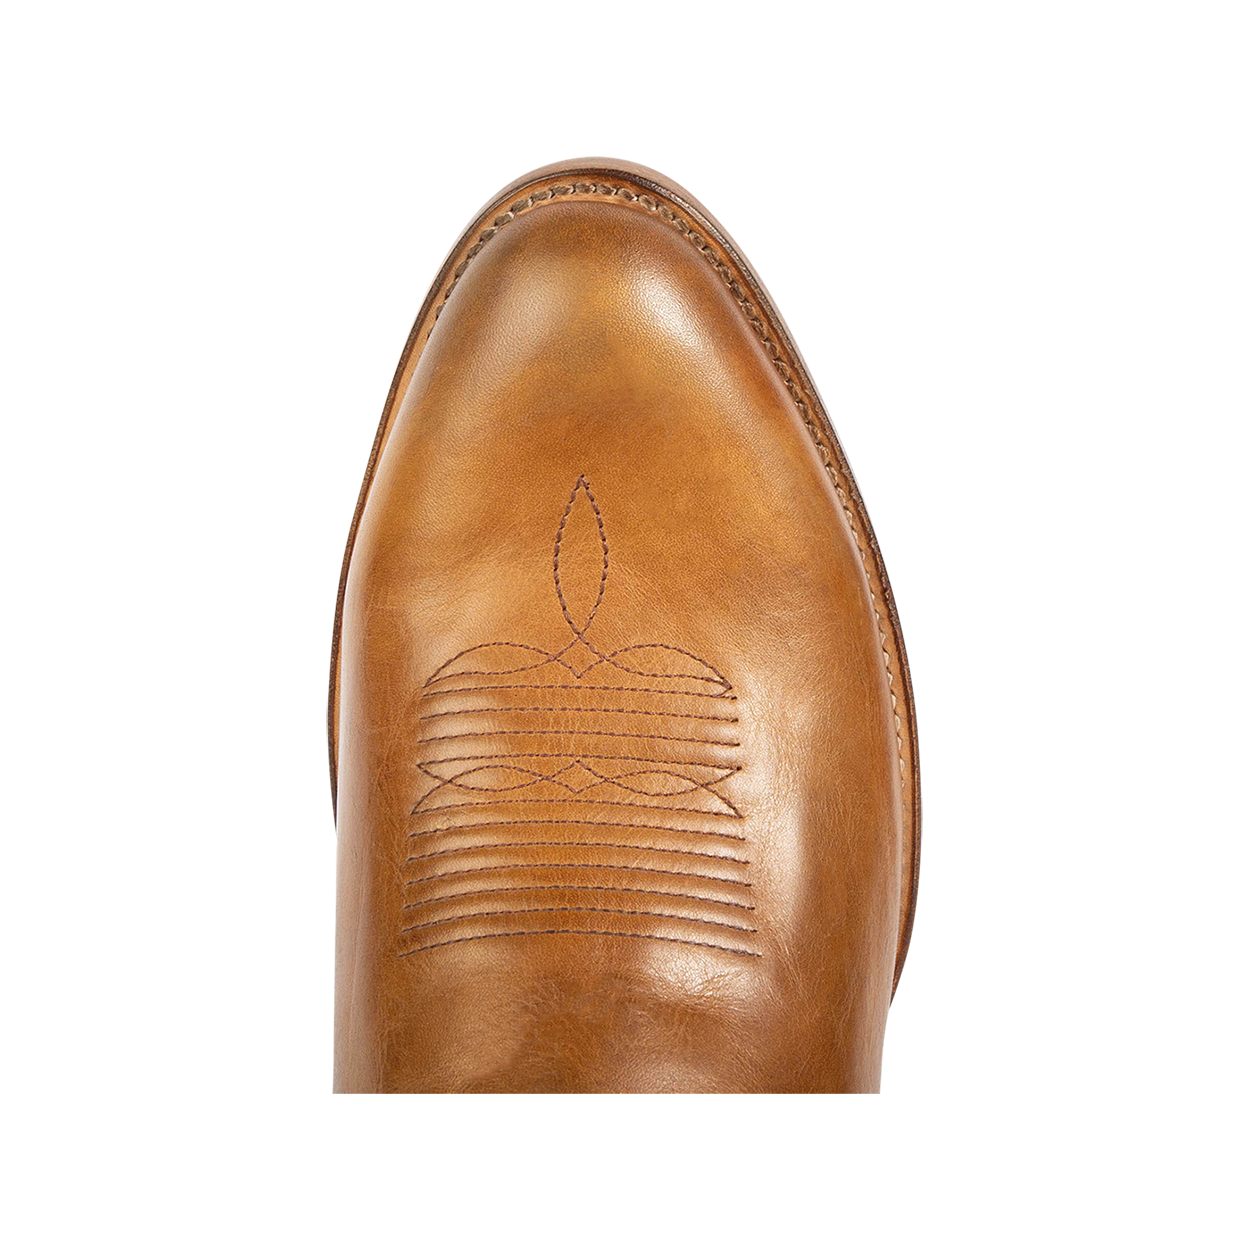 Top view showing traditional toe shape and stitch detailing on FREEBIRD men's Bandito camel leather boot